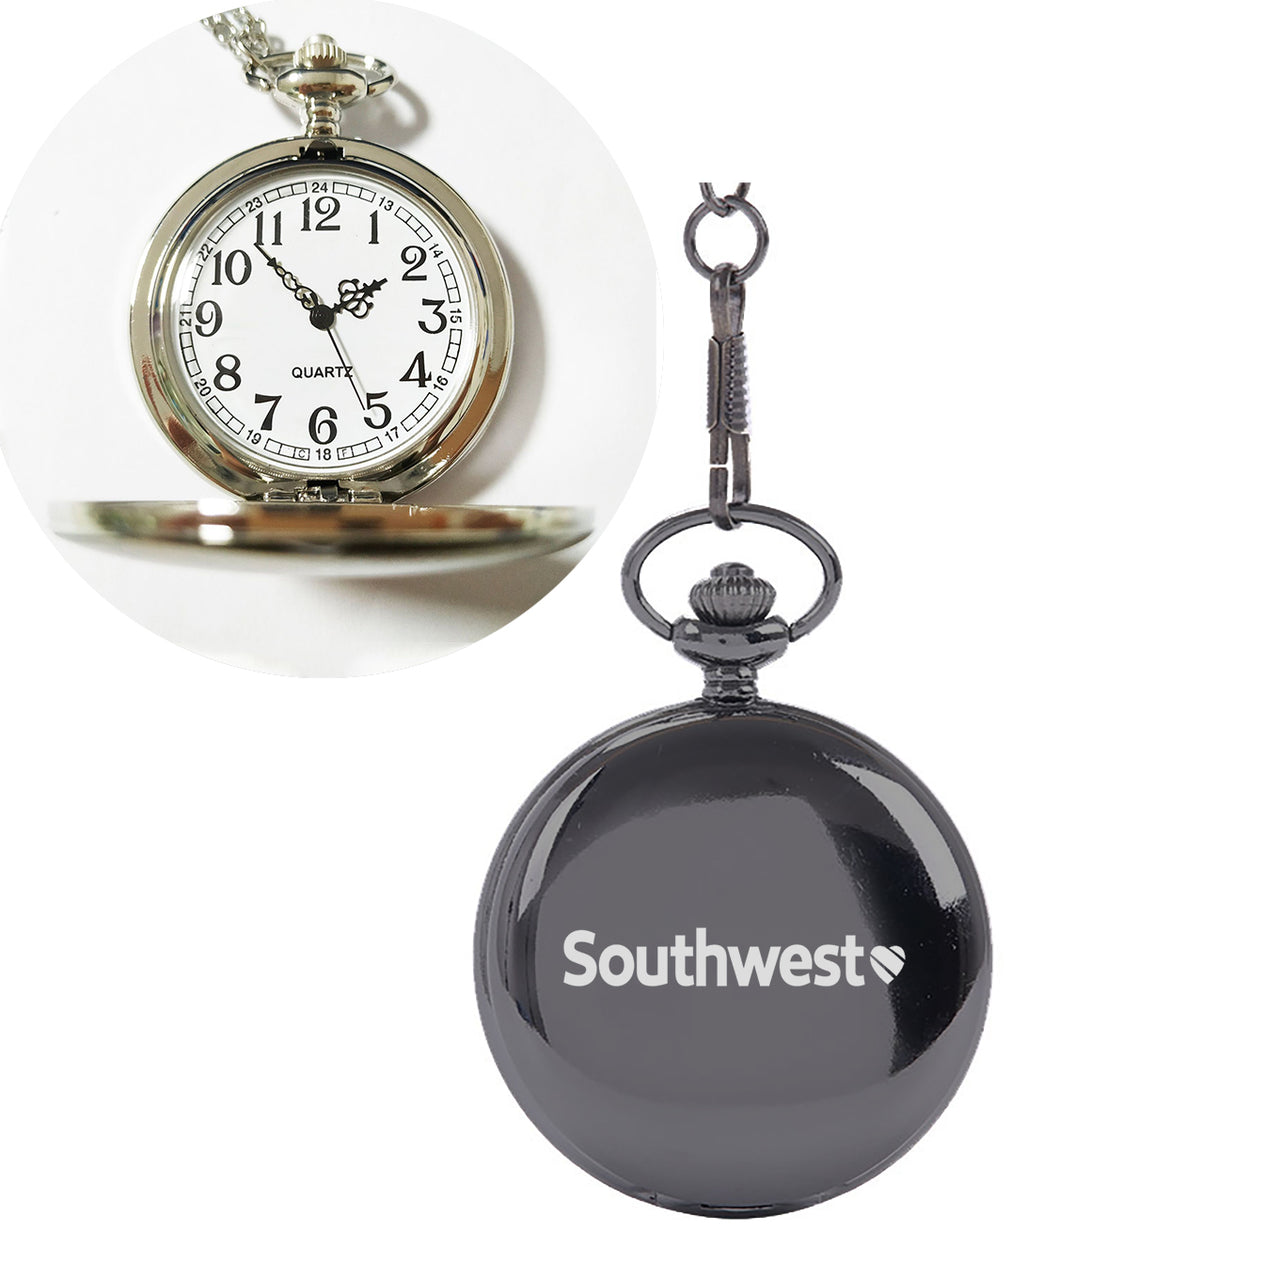 Southwest Airlines Designed Pocket Watches